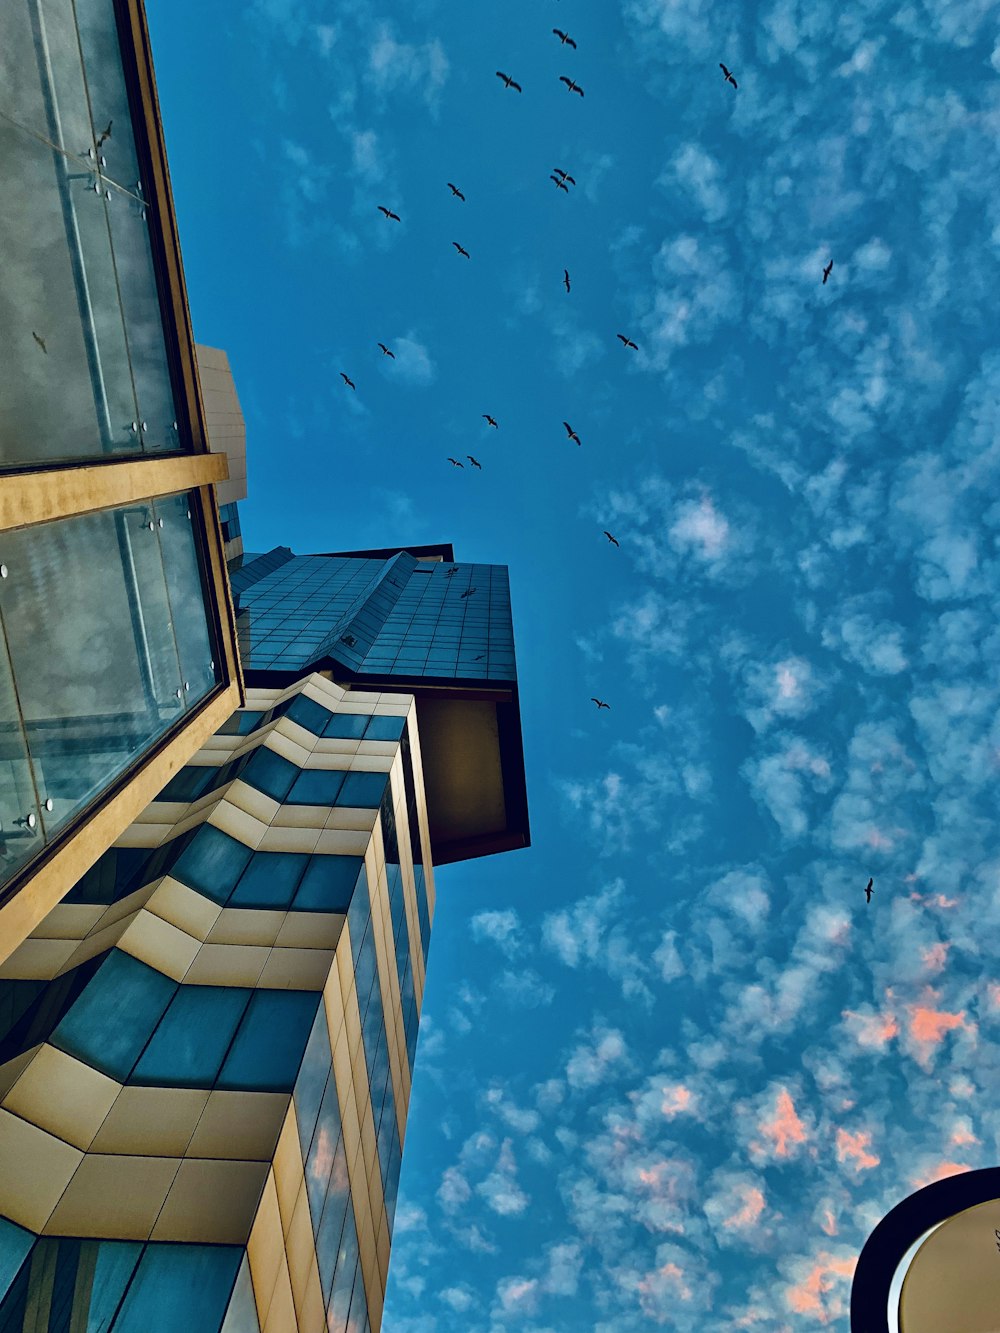 a group of birds flying over a tall building